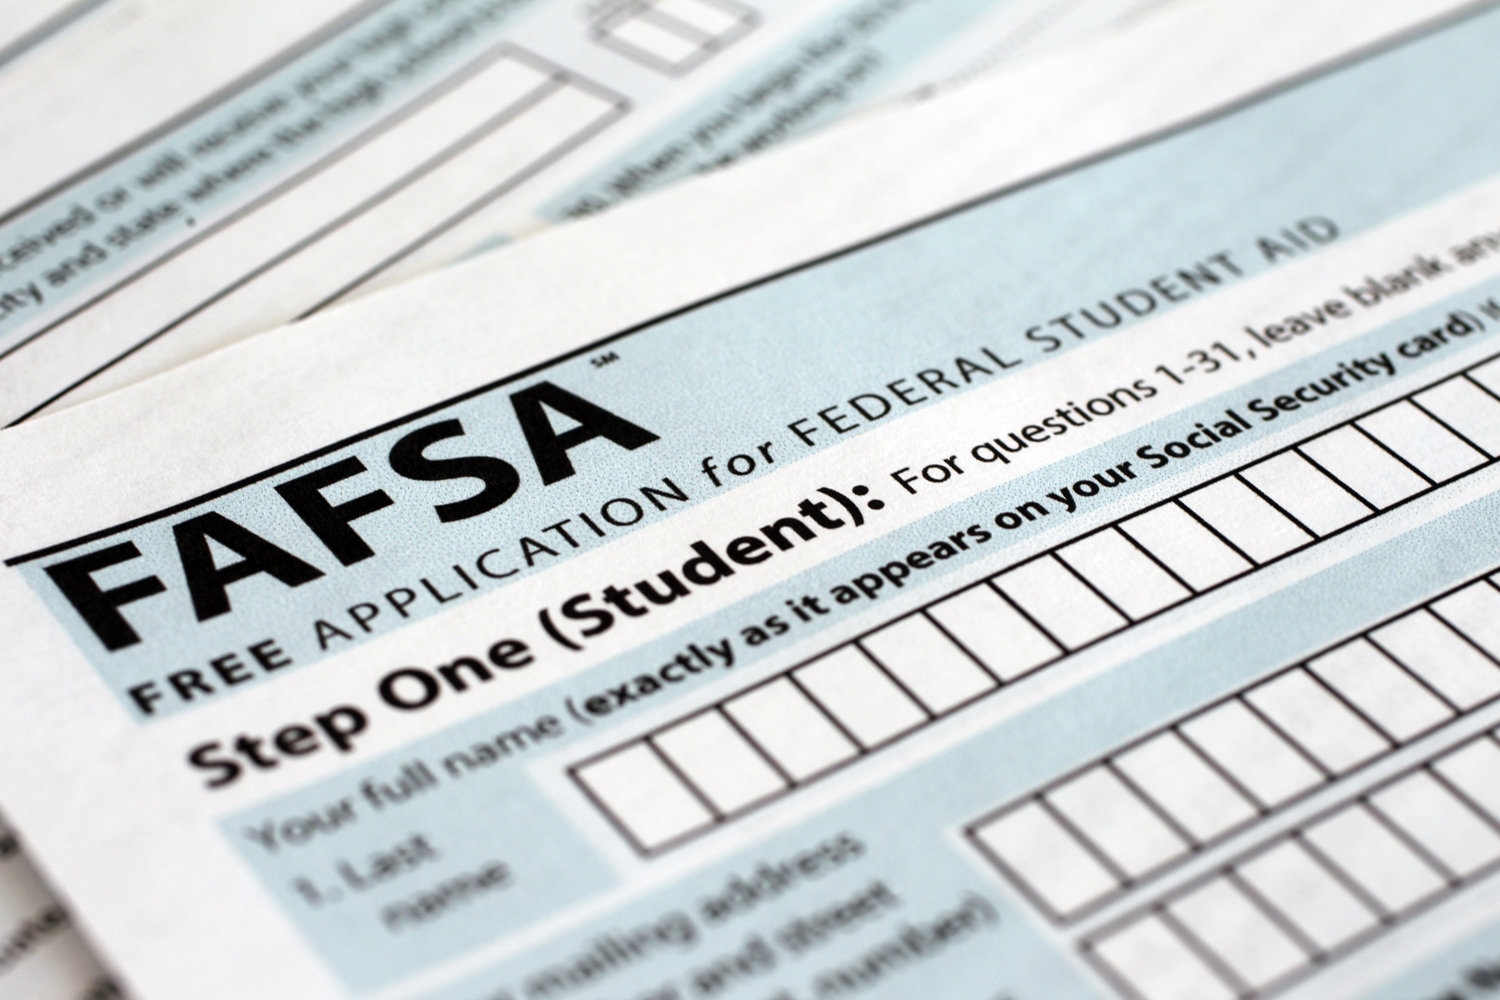 fafsa-student-loan-form-still-a-nightmare-despite-promised-fixes-time